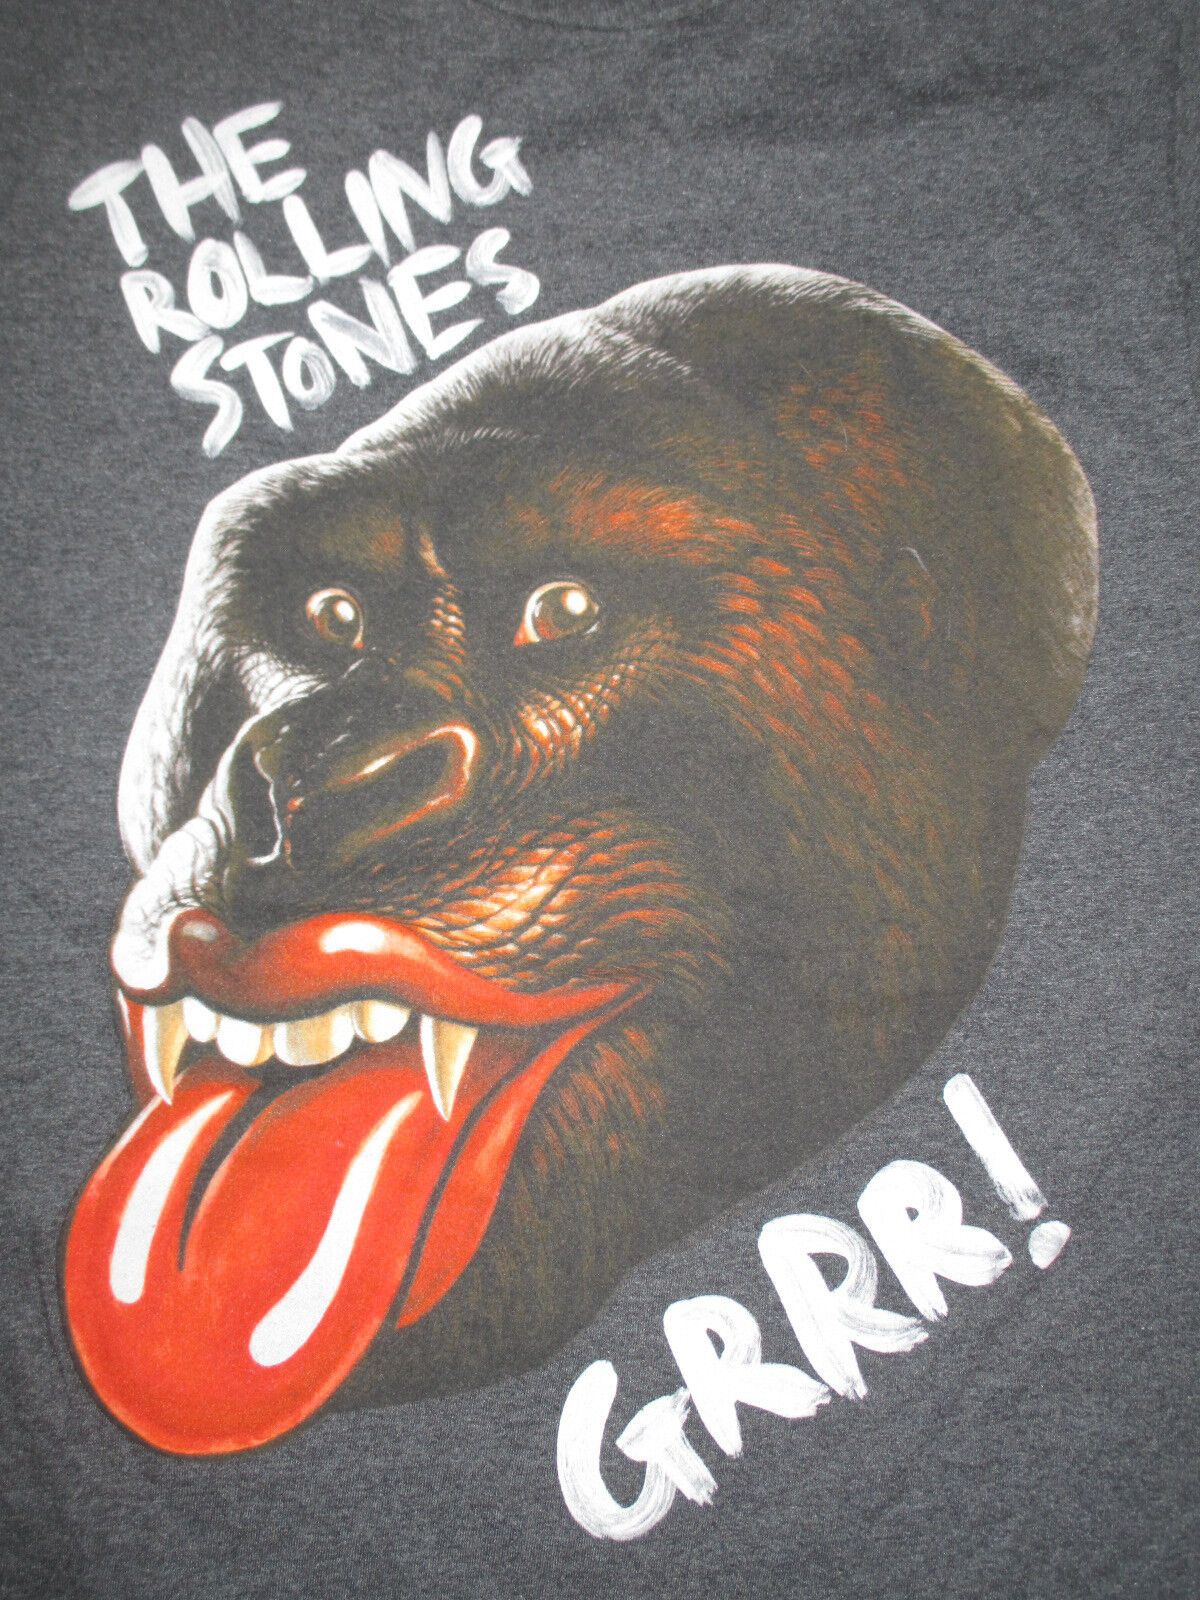 2013 ROLLING STONES 50 YEARS 